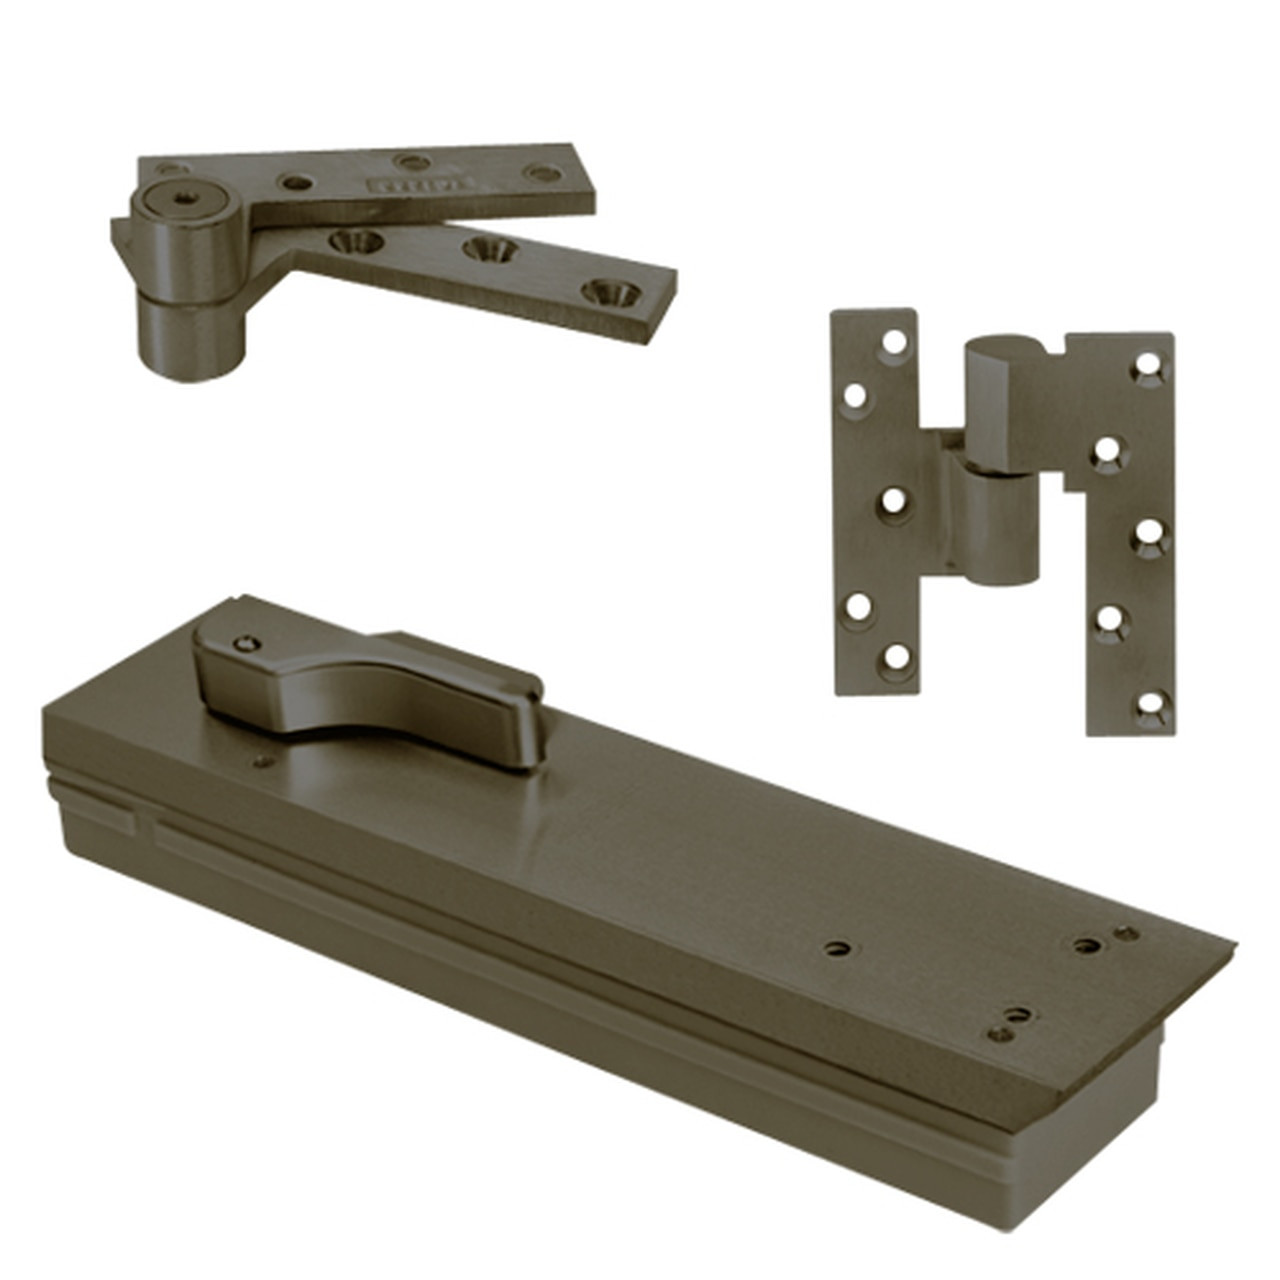 FQ5103NBC-SC-LH-613 Rixson Q51 Series Fire Rated 3/4" Offset Hung Shallow Depth Floor Closers in Dark Bronze Finish